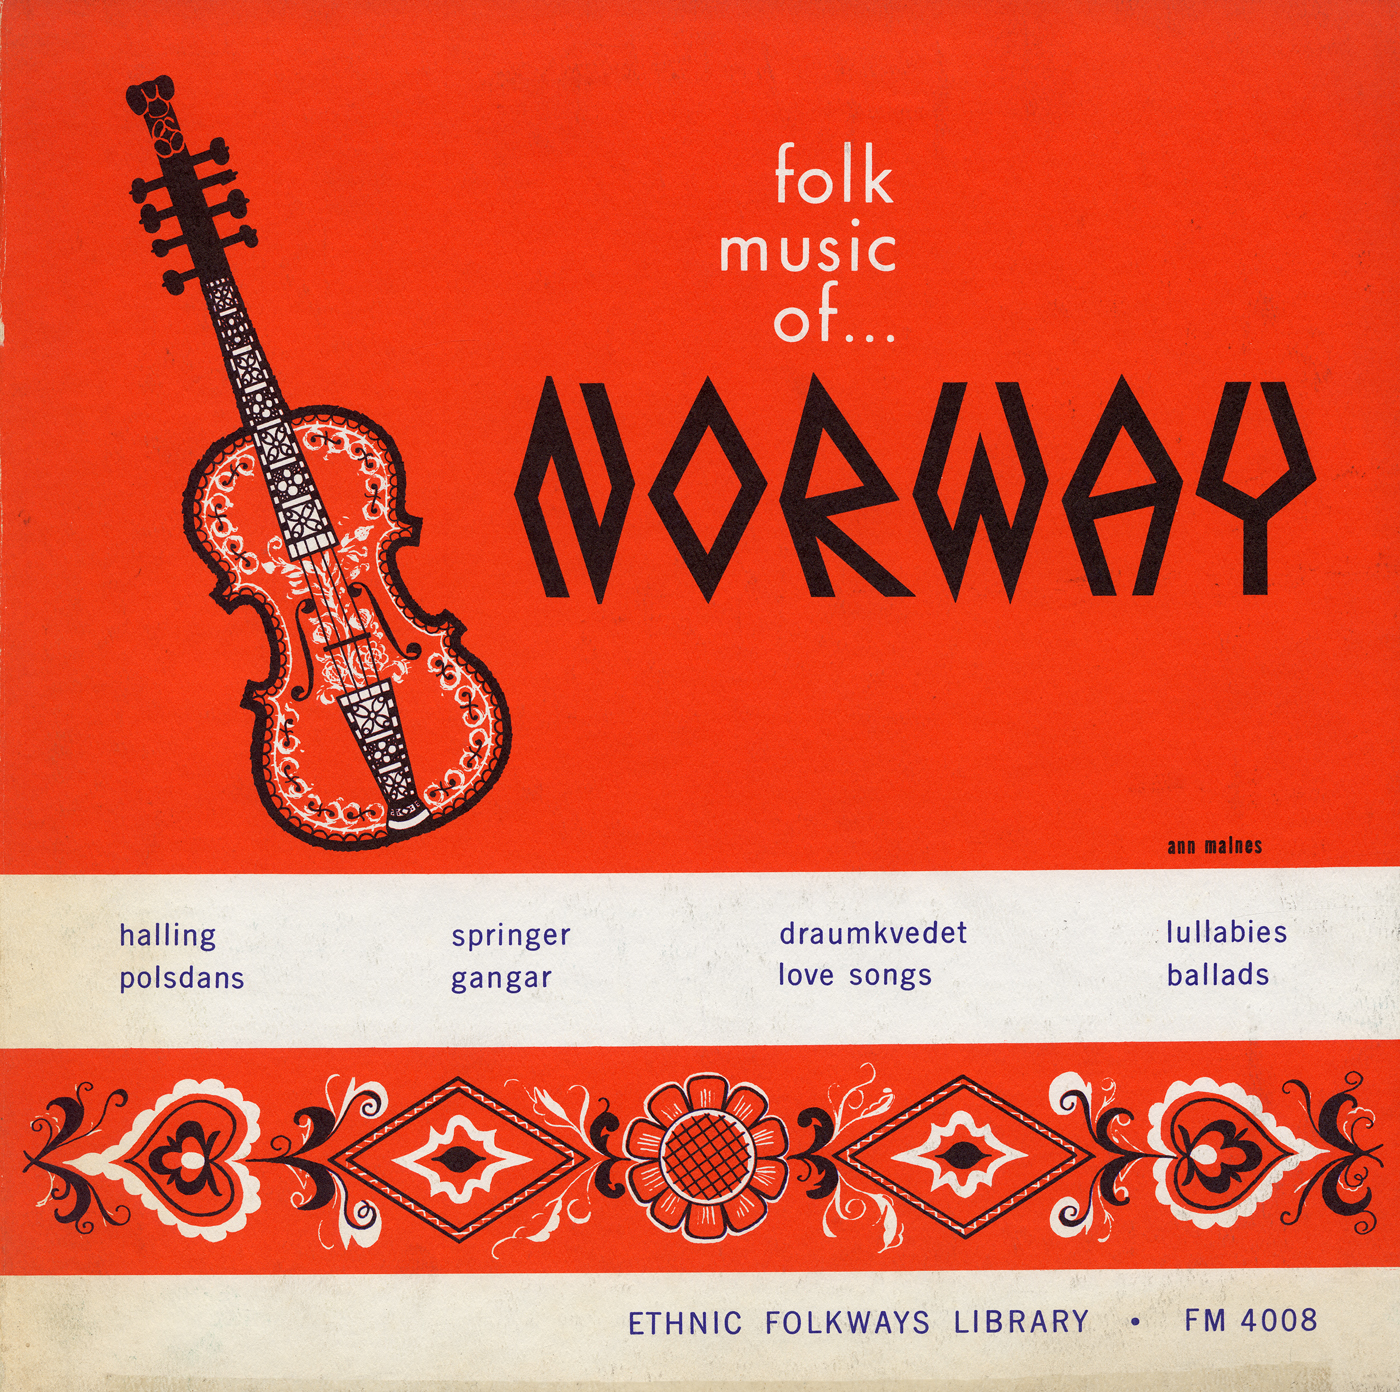 Lithuanian Songs and Dances  Smithsonian Folkways Recordings